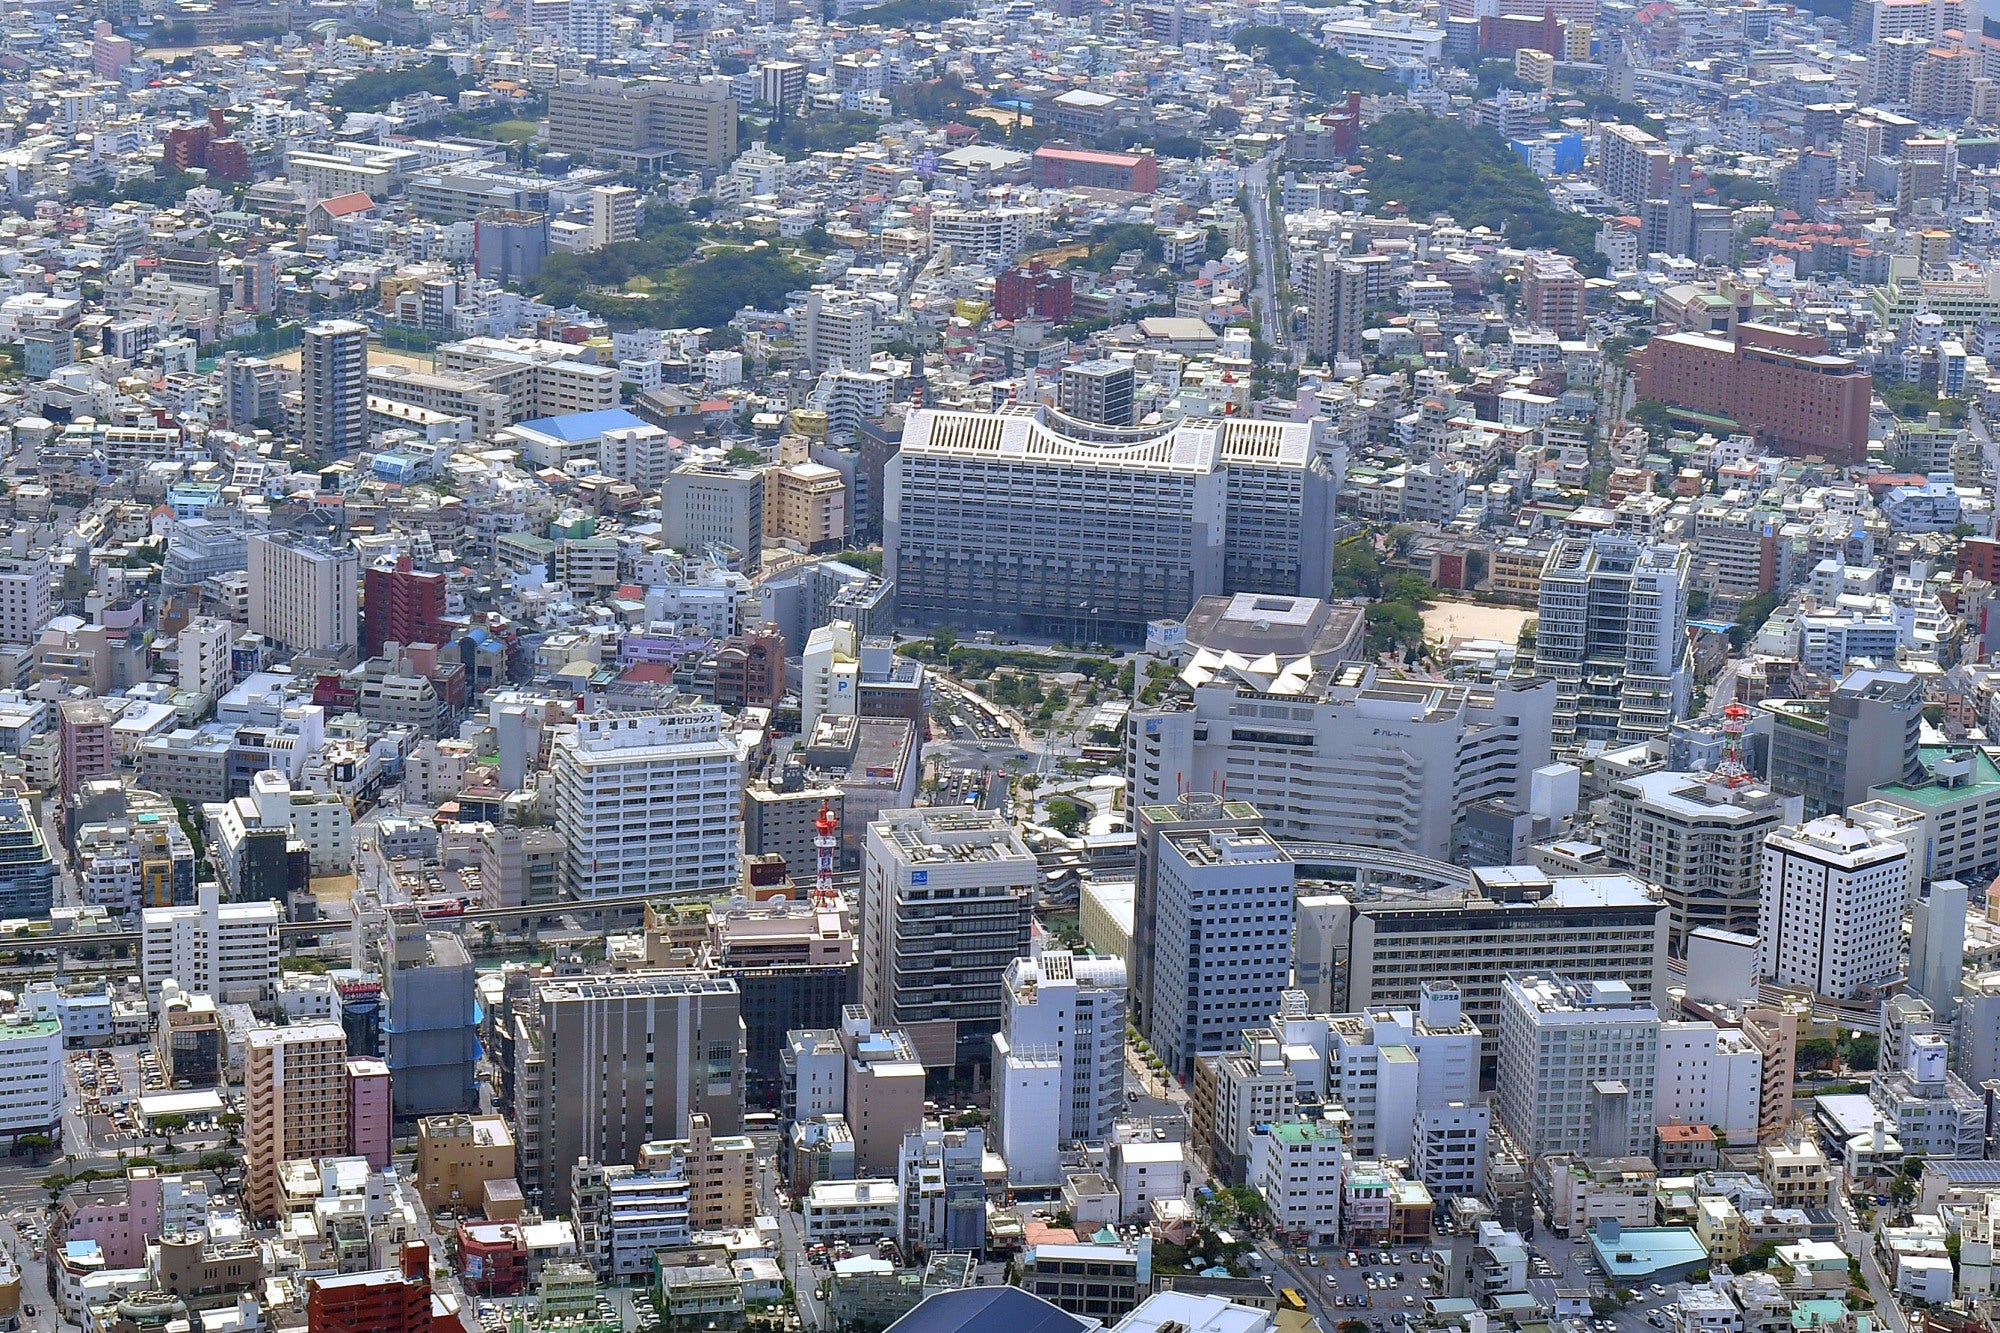 Is This The City Of Concrete In Japan?